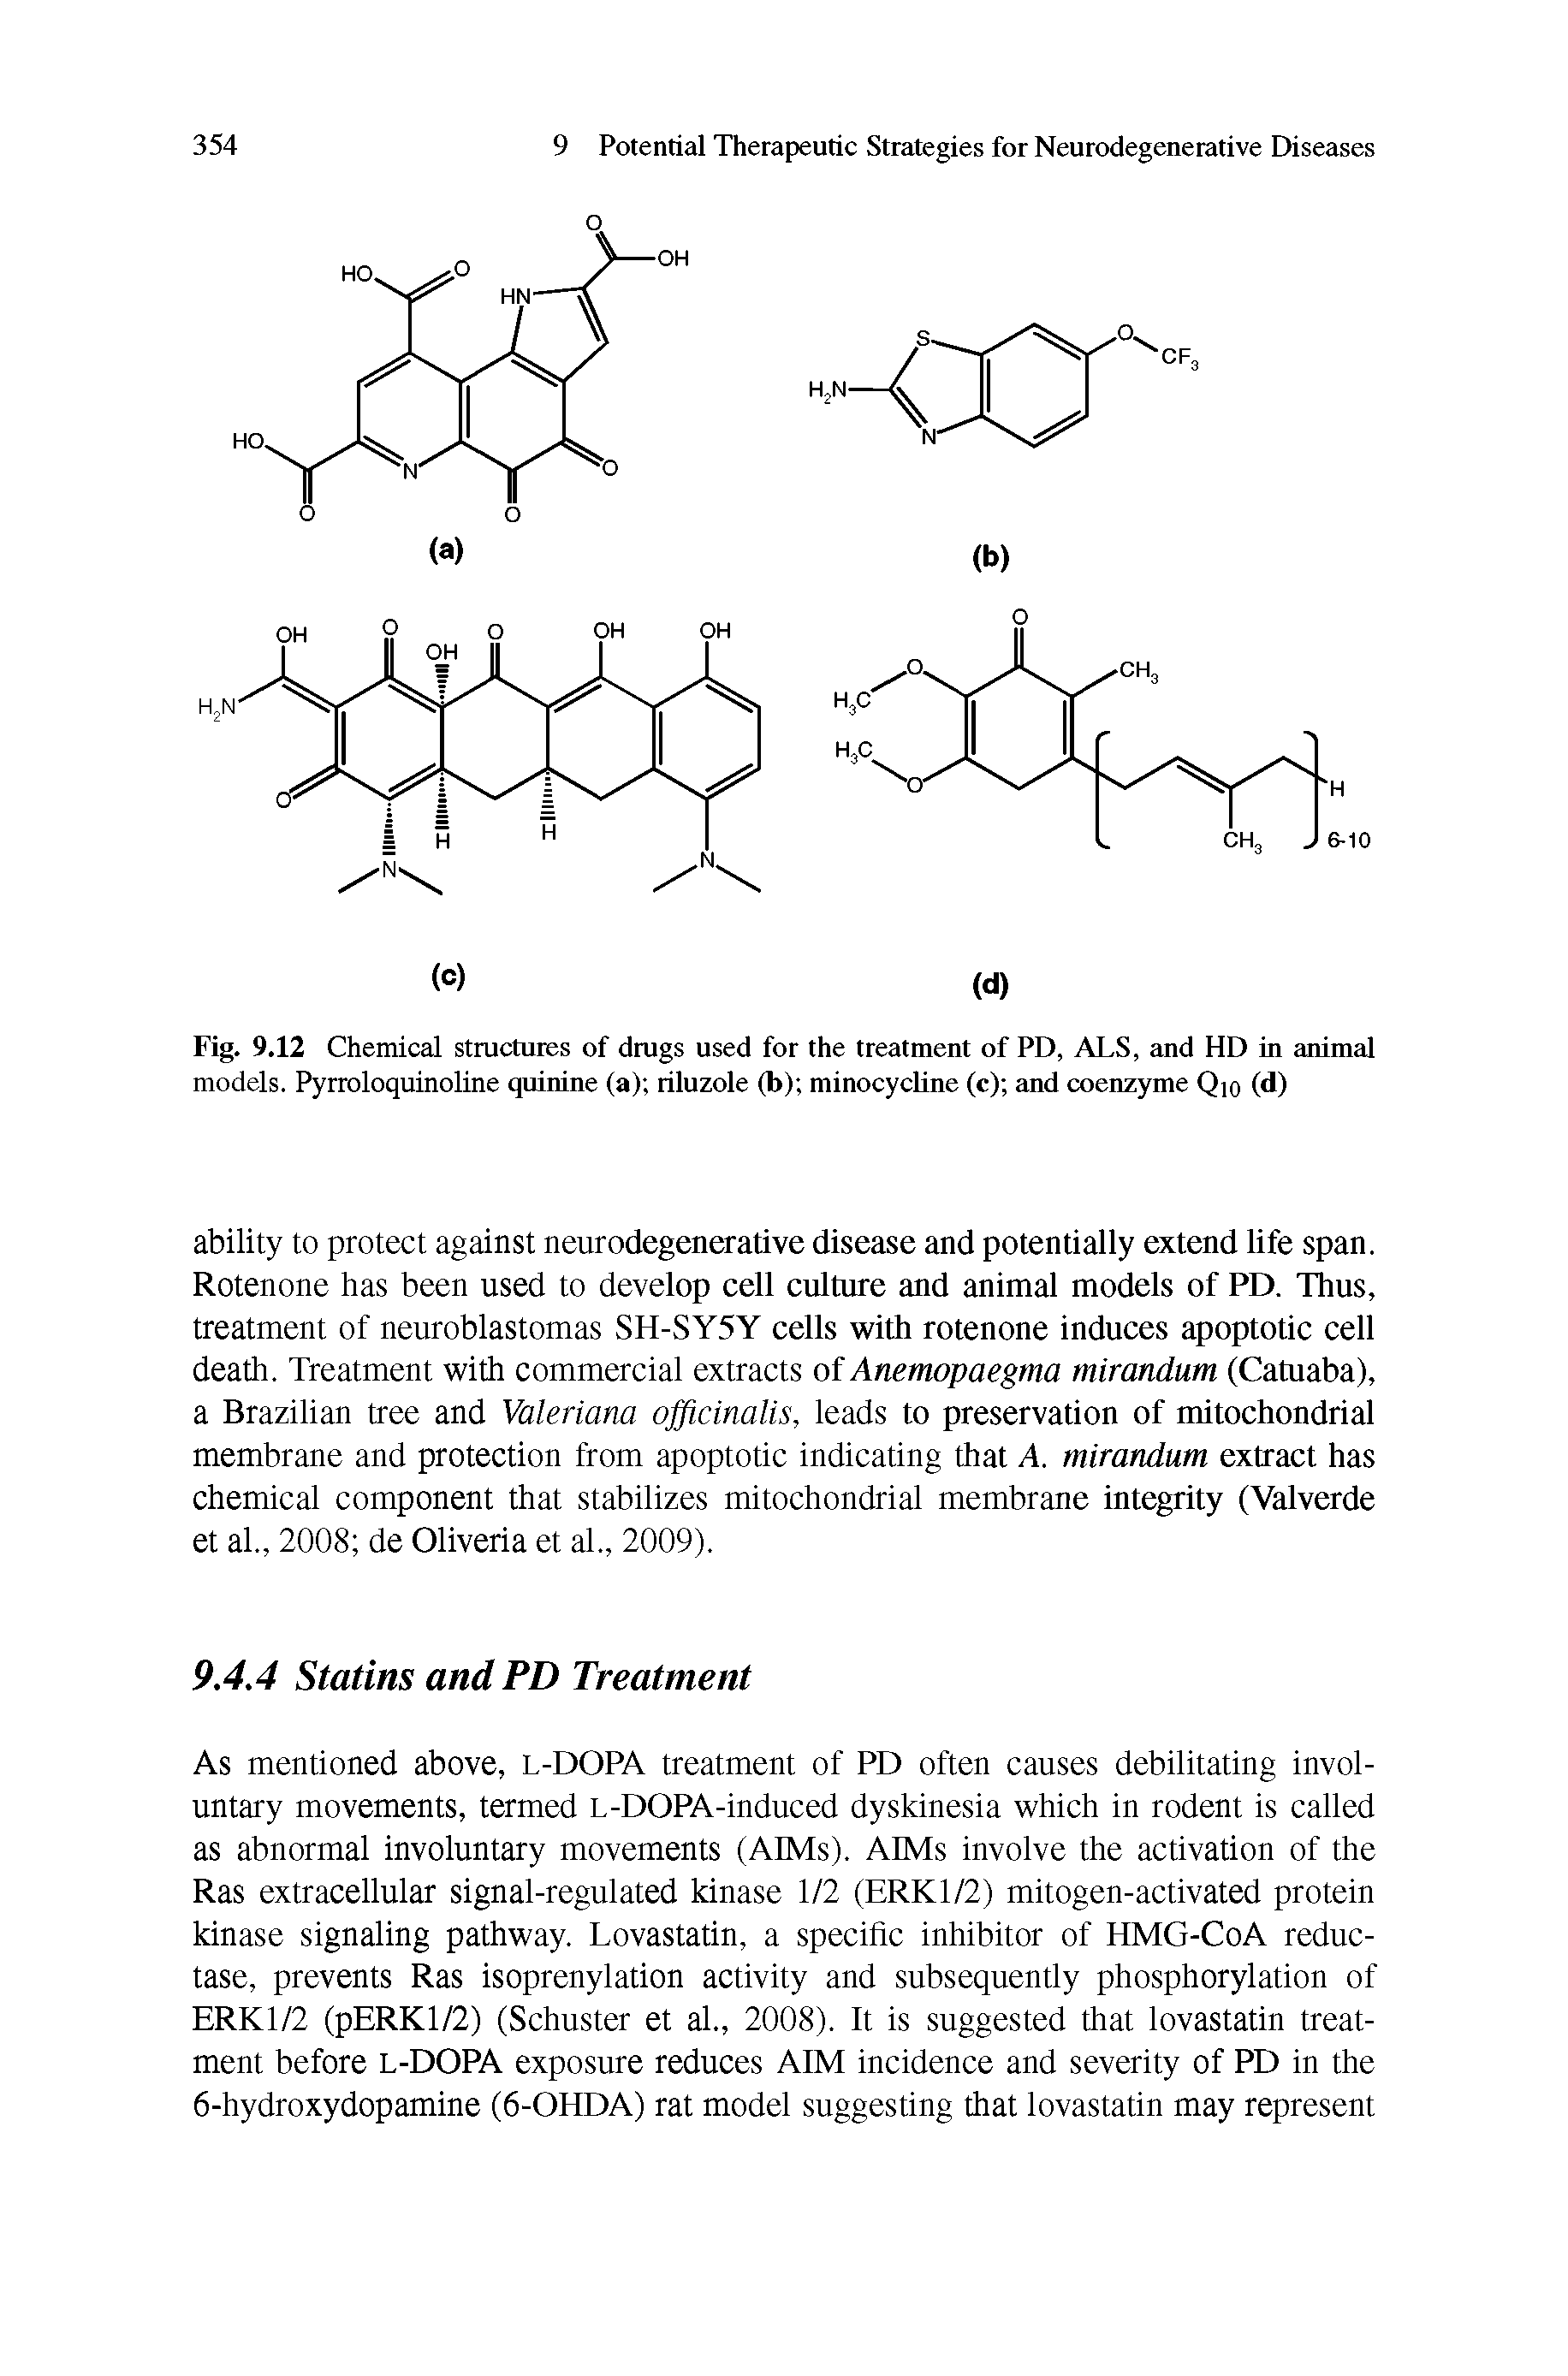 Fig. 9.12 Chemical structures of drugs used for the treatment of PD, ALS, and HD in animal models. Pyrroloquinoline quinine (a) riluzole (b) minocycline (c) and coenzyme Qio (d)...